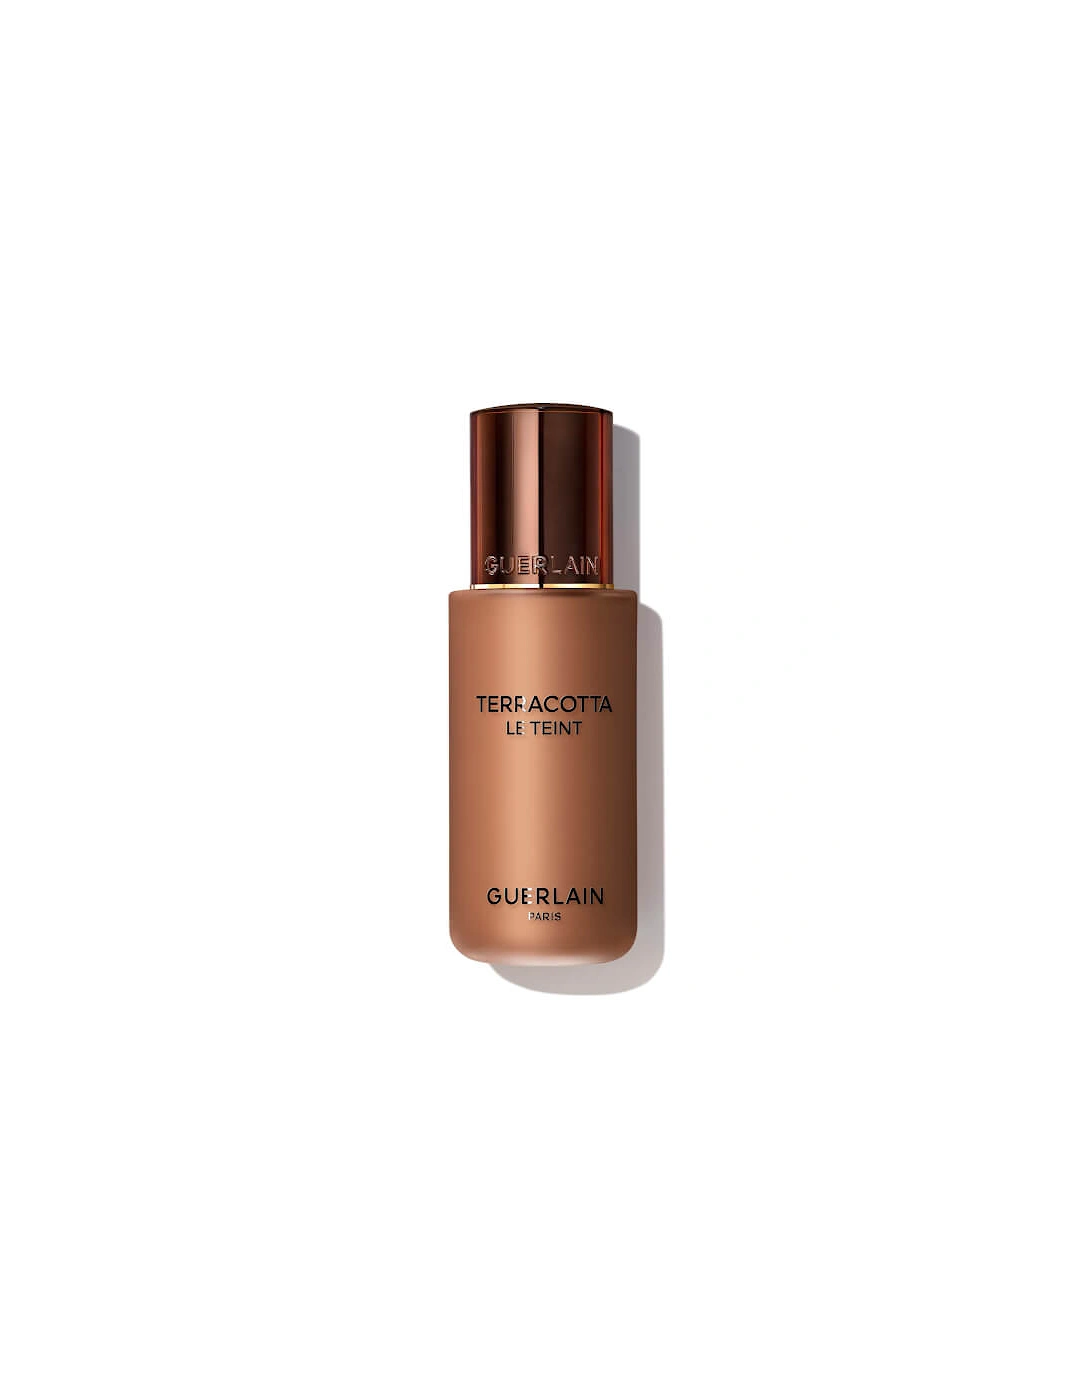 Terracotta Le Teint Healthy Glow Natural Perfection Foundation - 6.5N, 2 of 1